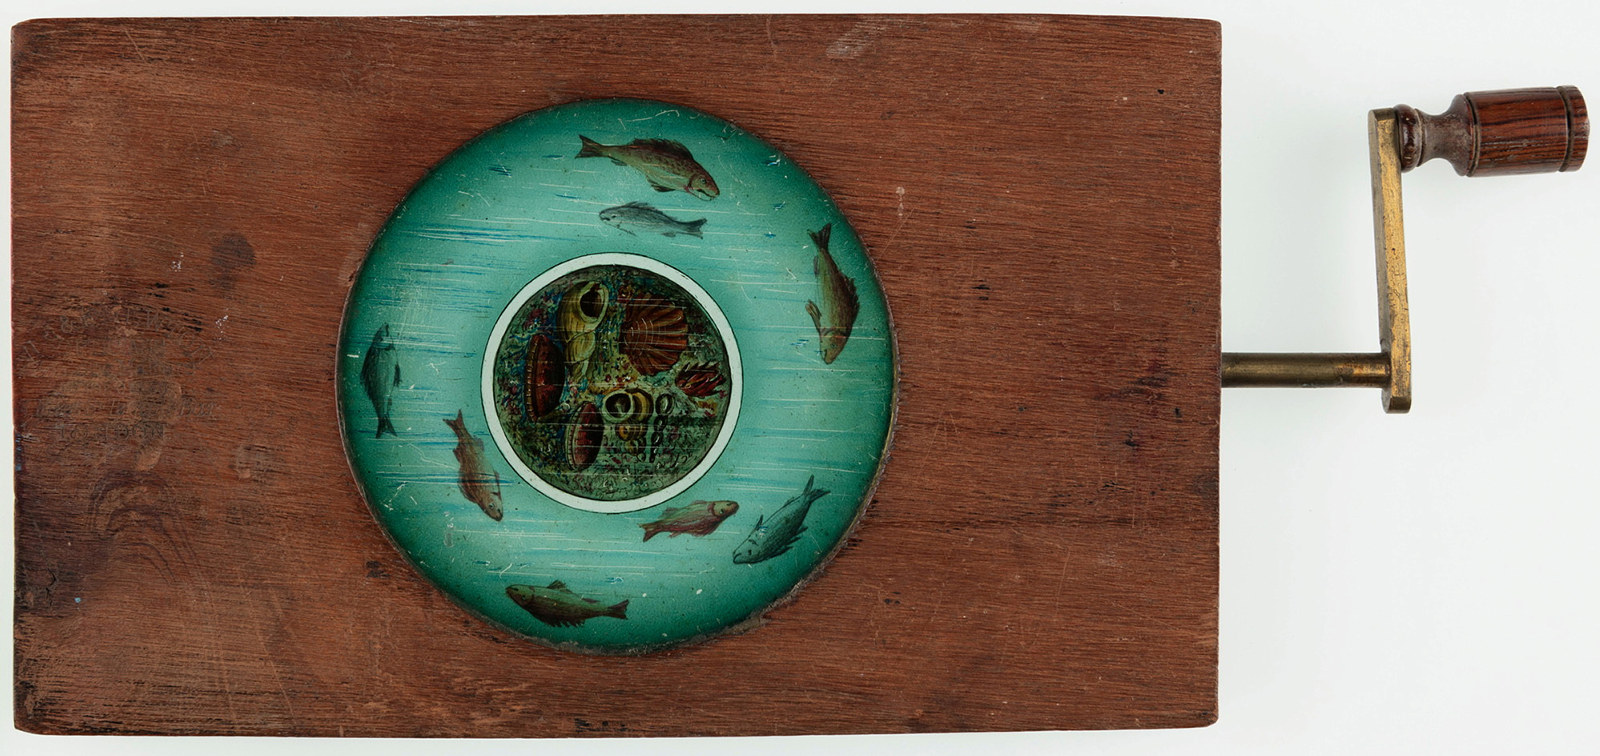 Automated timber and brass framed circular glass lantern slide featuring fish and other marine creatures. Timber and brass handle operates secondary plate allowing the fish to move.